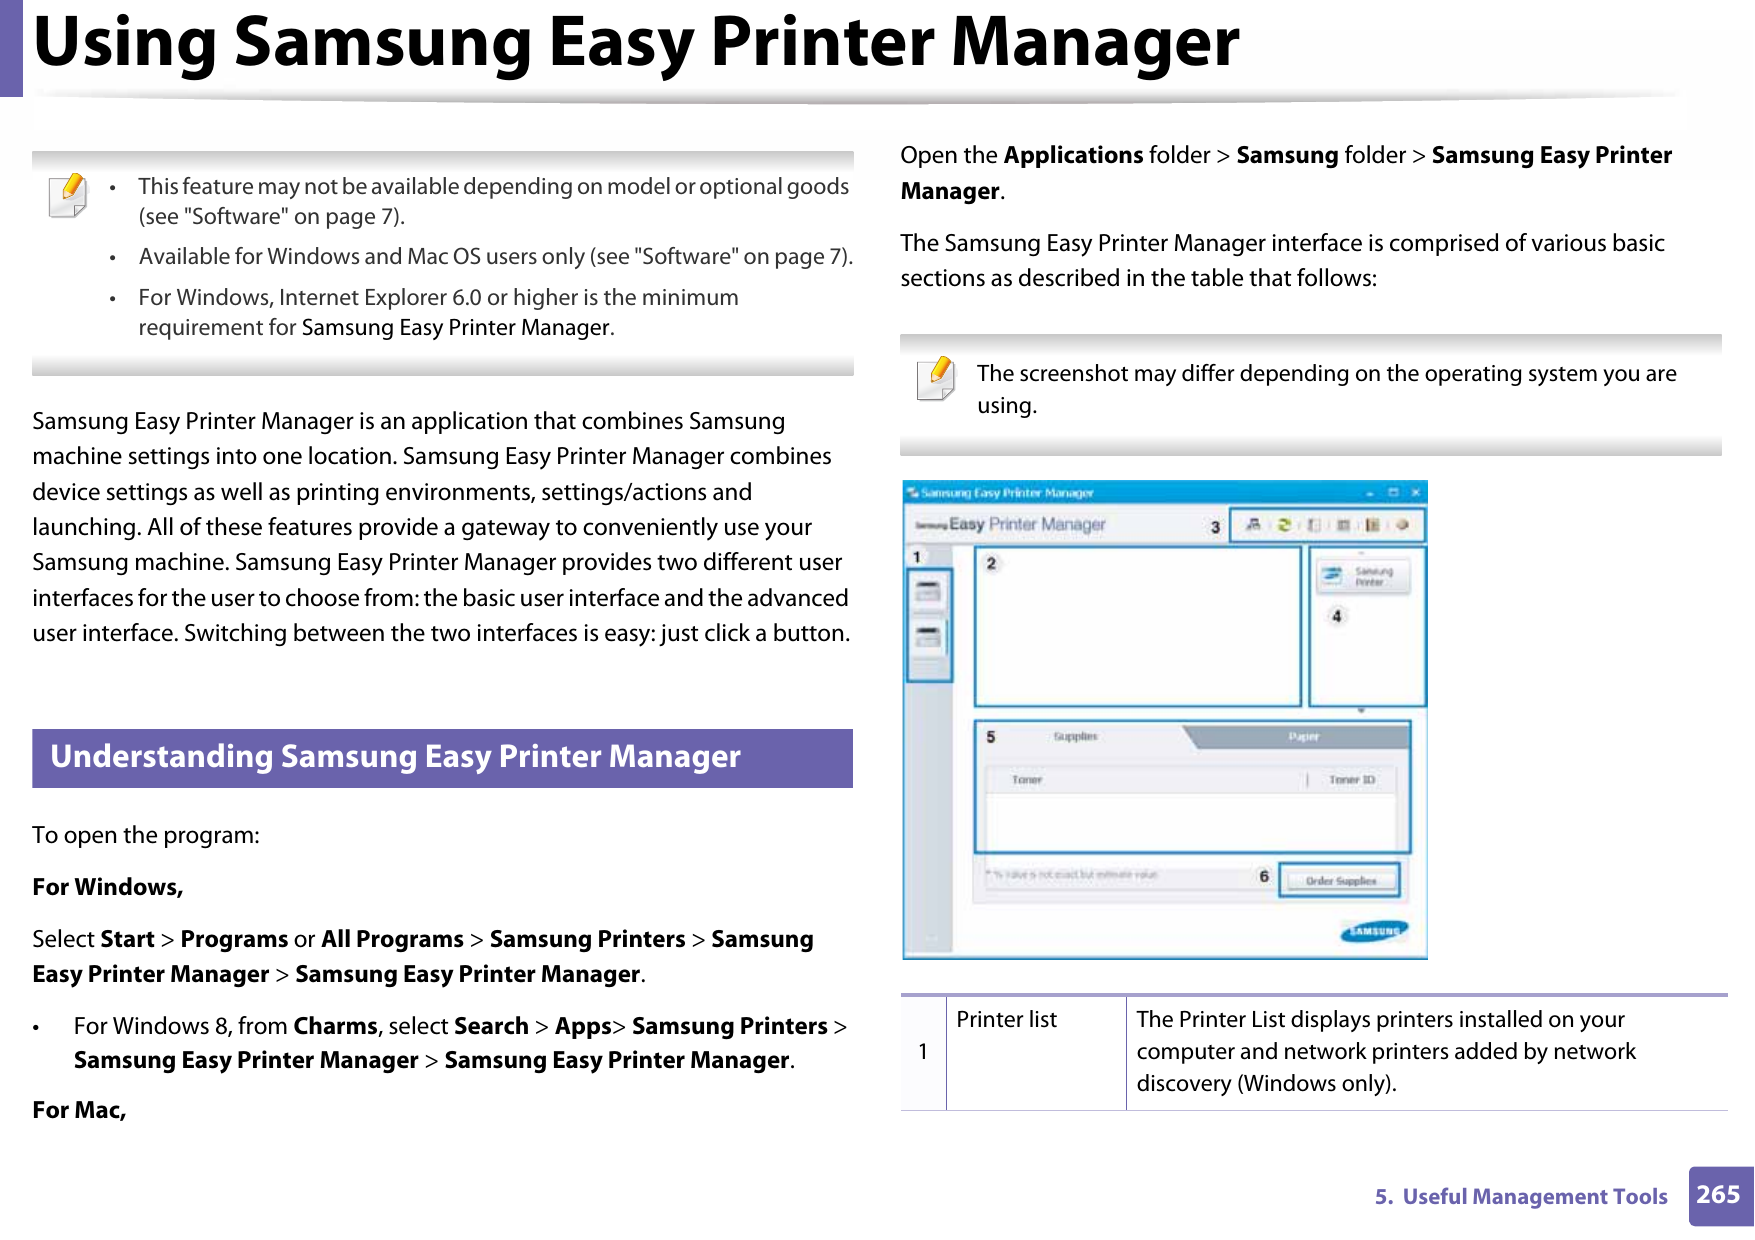 2655.  Useful Management ToolsUsing Samsung Easy Printer Manager  • This feature may not be available depending on model or optional goods (see &quot;Software&quot; on page 7).• Available for Windows and Mac OS users only (see &quot;Software&quot; on page 7).• For Windows, Internet Explorer 6.0 or higher is the minimum requirement for Samsung Easy Printer Manager. Samsung Easy Printer Manager is an application that combines Samsung machine settings into one location. Samsung Easy Printer Manager combines device settings as well as printing environments, settings/actions and launching. All of these features provide a gateway to conveniently use your Samsung machine. Samsung Easy Printer Manager provides two different user interfaces for the user to choose from: the basic user interface and the advanced user interface. Switching between the two interfaces is easy: just click a button.5 Understanding Samsung Easy Printer ManagerTo open the program: For Windows,Select Start &gt; Programs or All Programs &gt; Samsung Printers &gt; Samsung Easy Printer Manager &gt; Samsung Easy Printer Manager.• For Windows 8, from Charms, select Search &gt; Apps&gt; Samsung Printers &gt; Samsung Easy Printer Manager &gt; Samsung Easy Printer Manager.For Mac,Open the Applications folder &gt; Samsung folder &gt; Samsung Easy Printer Manager.The Samsung Easy Printer Manager interface is comprised of various basic sections as described in the table that follows: The screenshot may differ depending on the operating system you are using. 1Printer list The Printer List displays printers installed on your computer and network printers added by network discovery (Windows only).